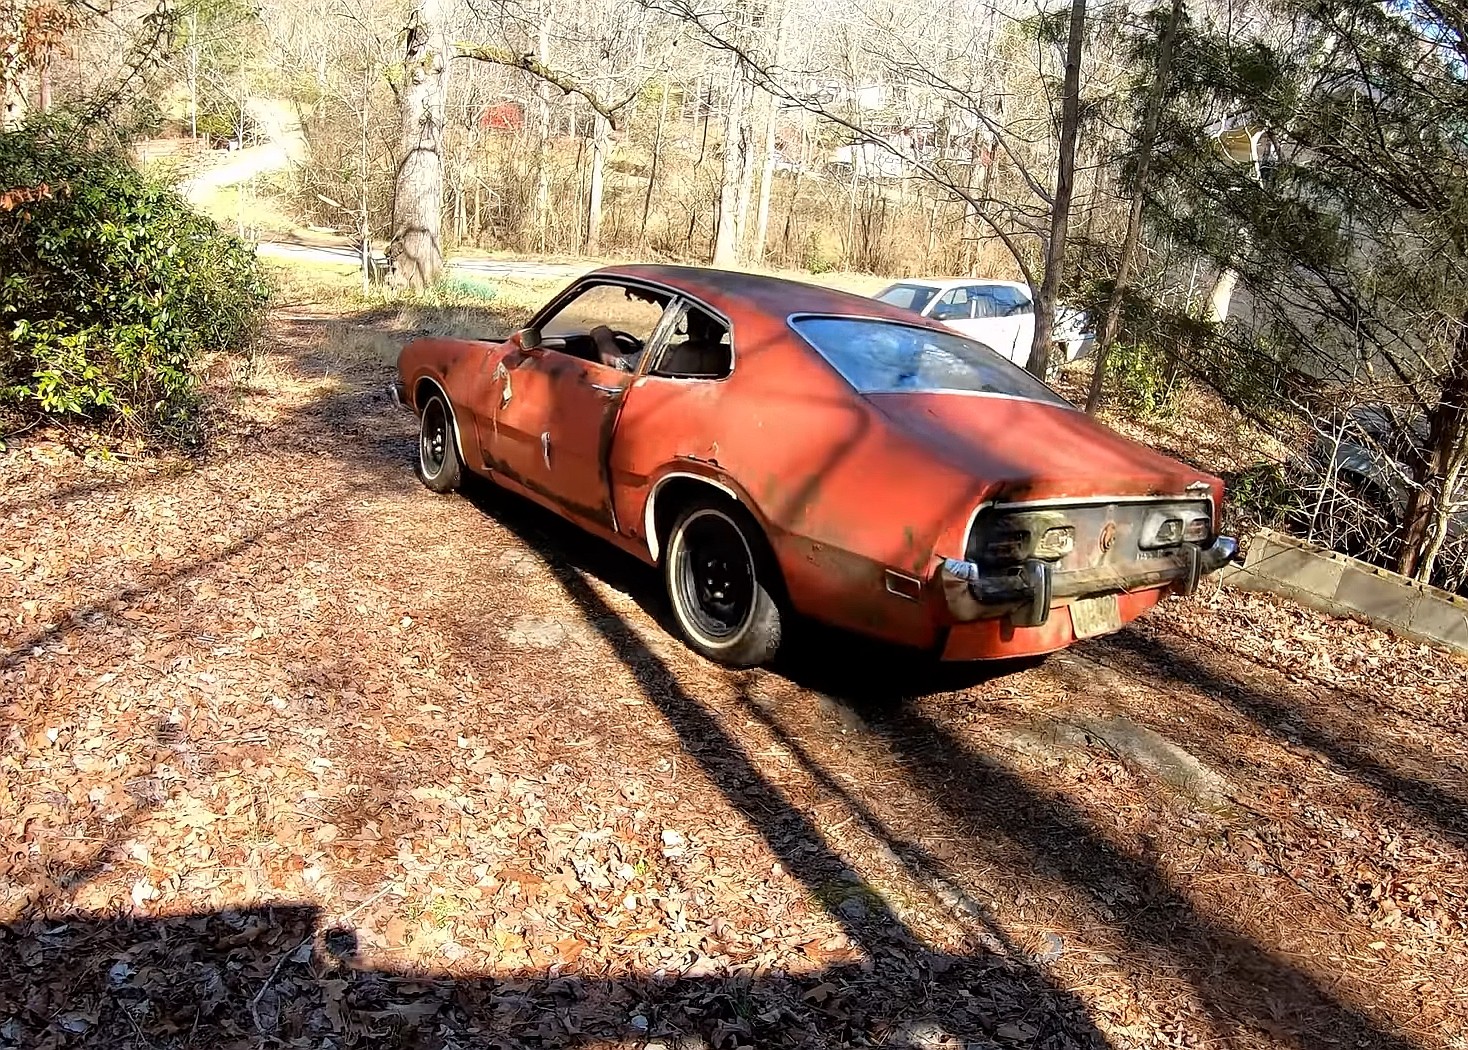 1973 mercury comet gt takes first drive in 35 years almost turns into a fireball 6